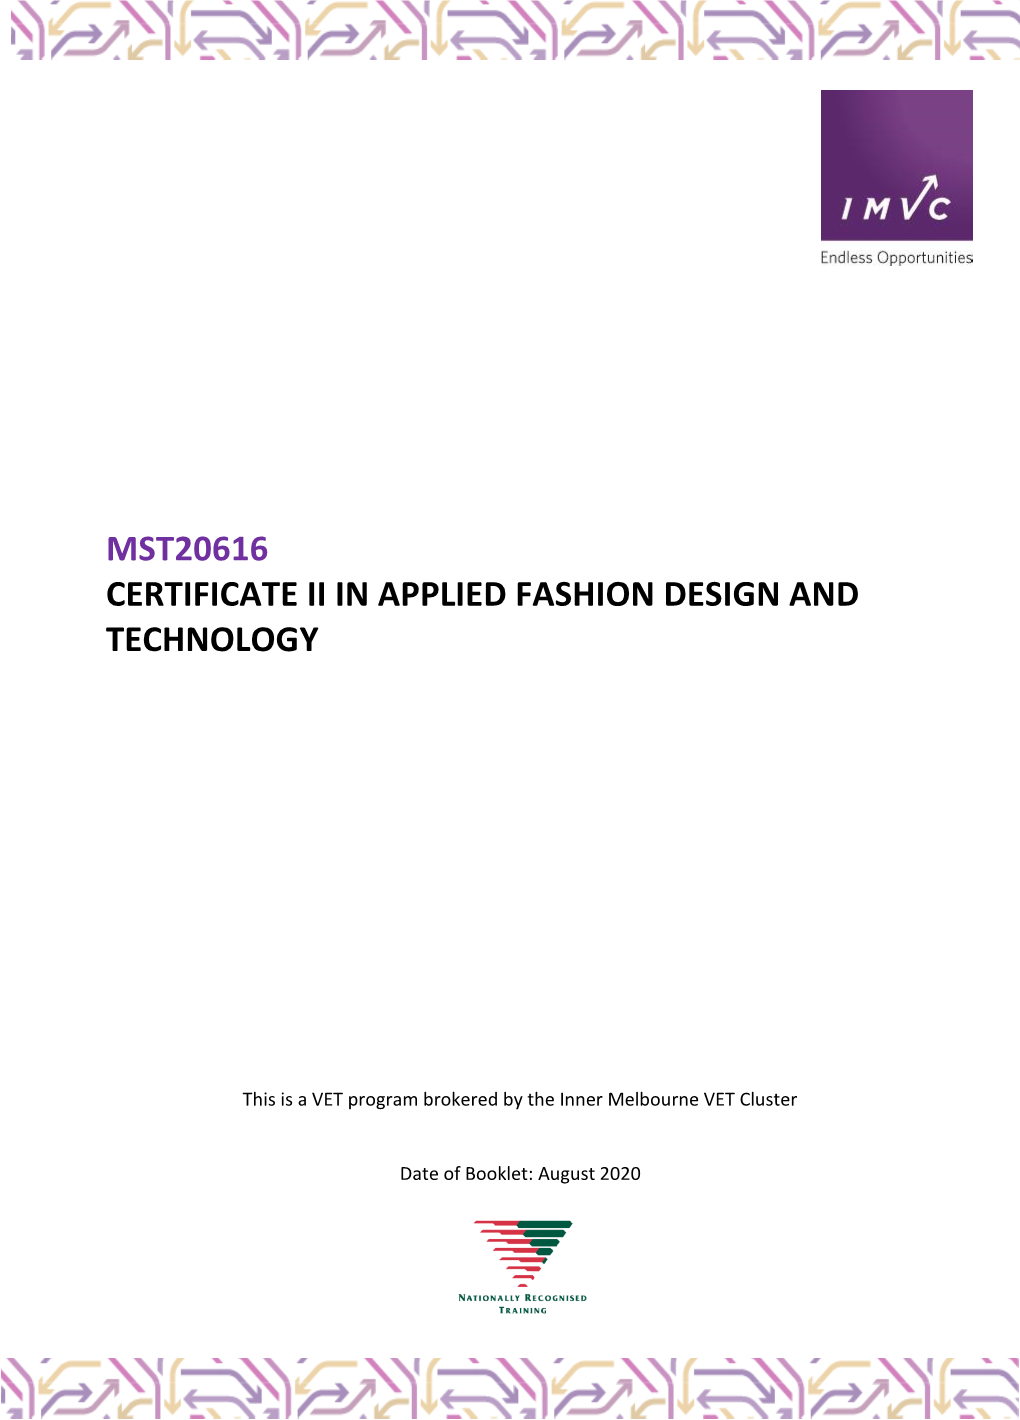 Applied Fashion Design and Technology